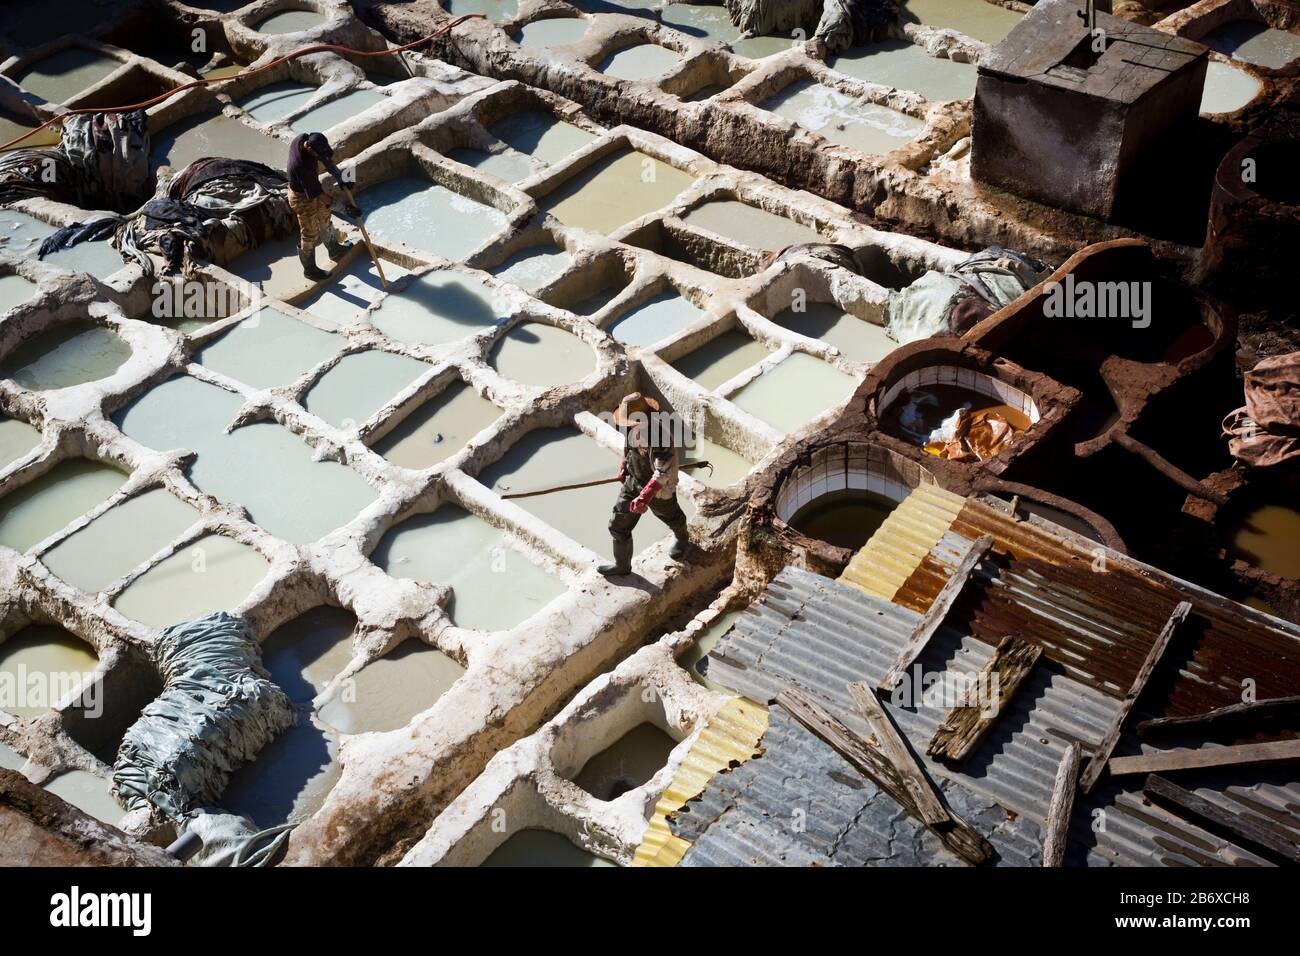 Workers in the Tanners Quarter of Fes, Morocco Stock Photo